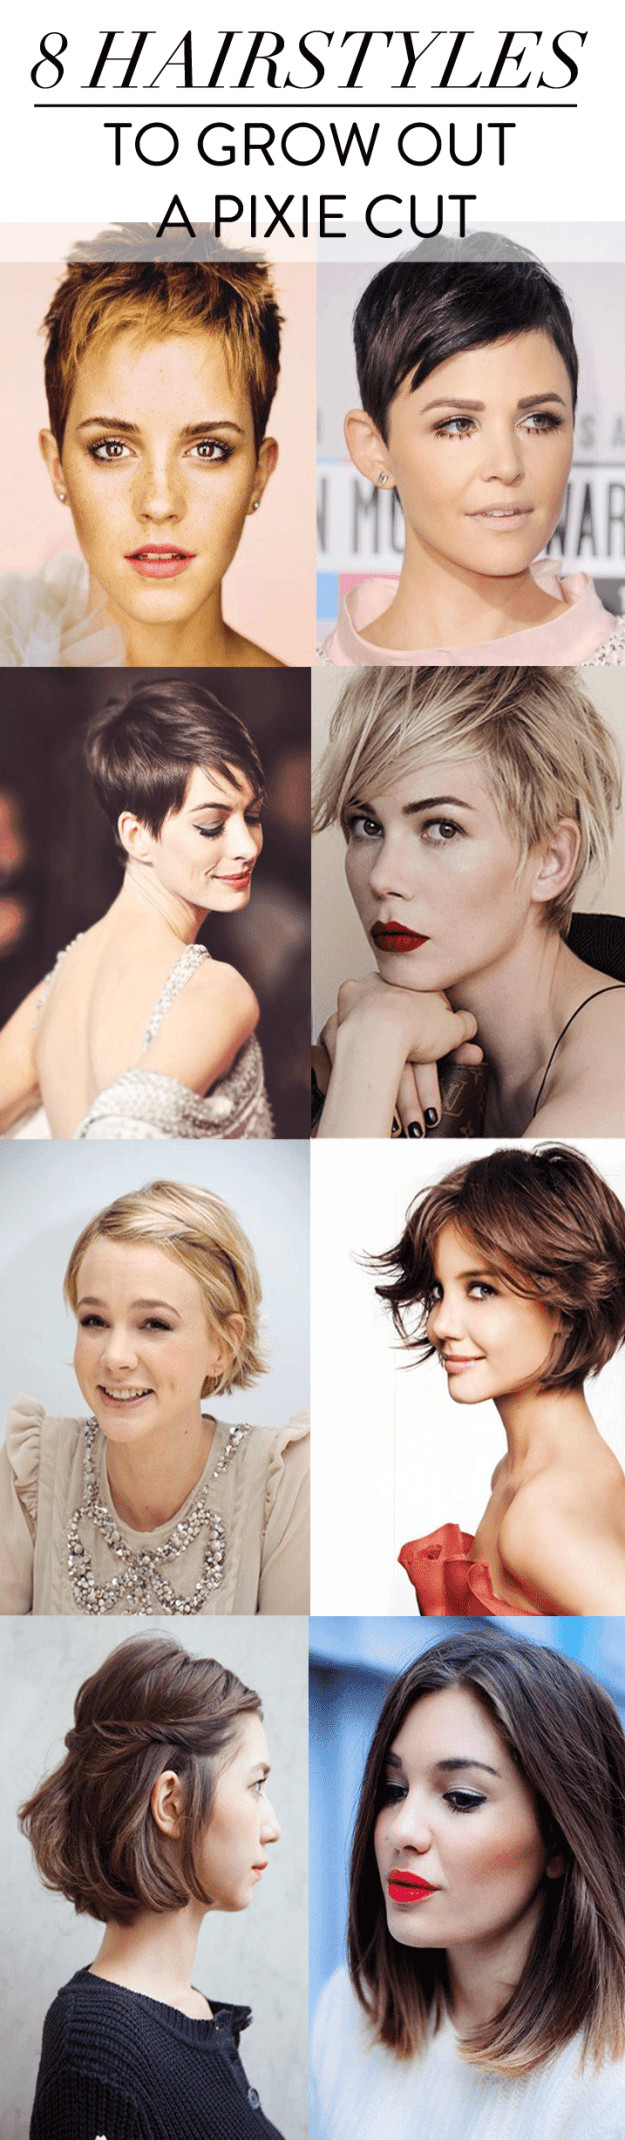 Hairstyles For Growing Out Undercut
 how to grow out a pixie cut